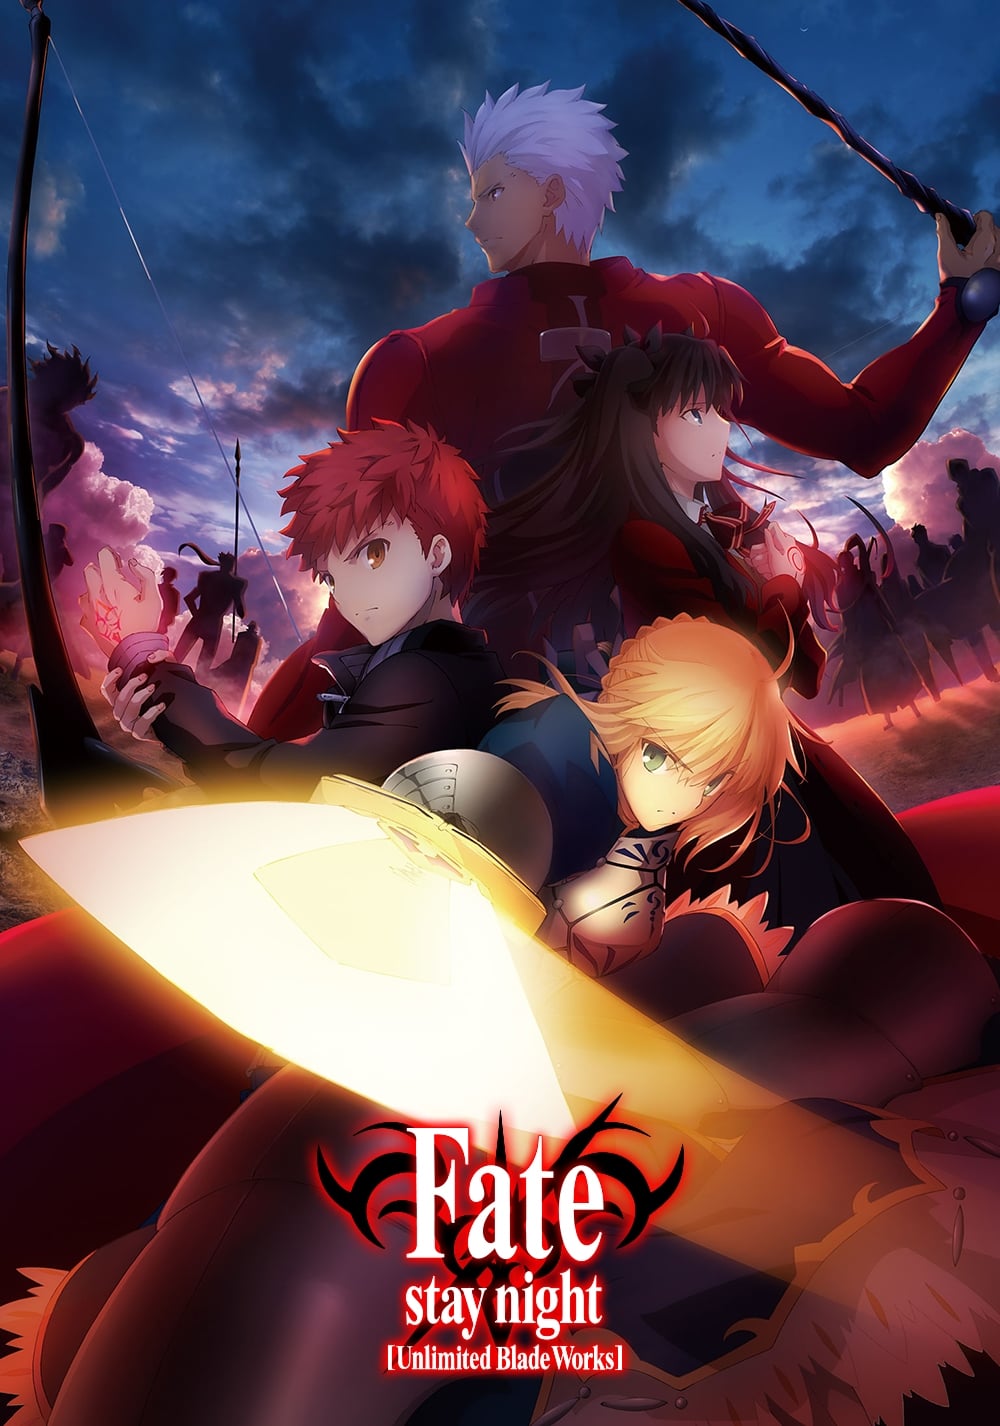 Affiche de la série Fate Stay Night : Unlimited Blade Works poster